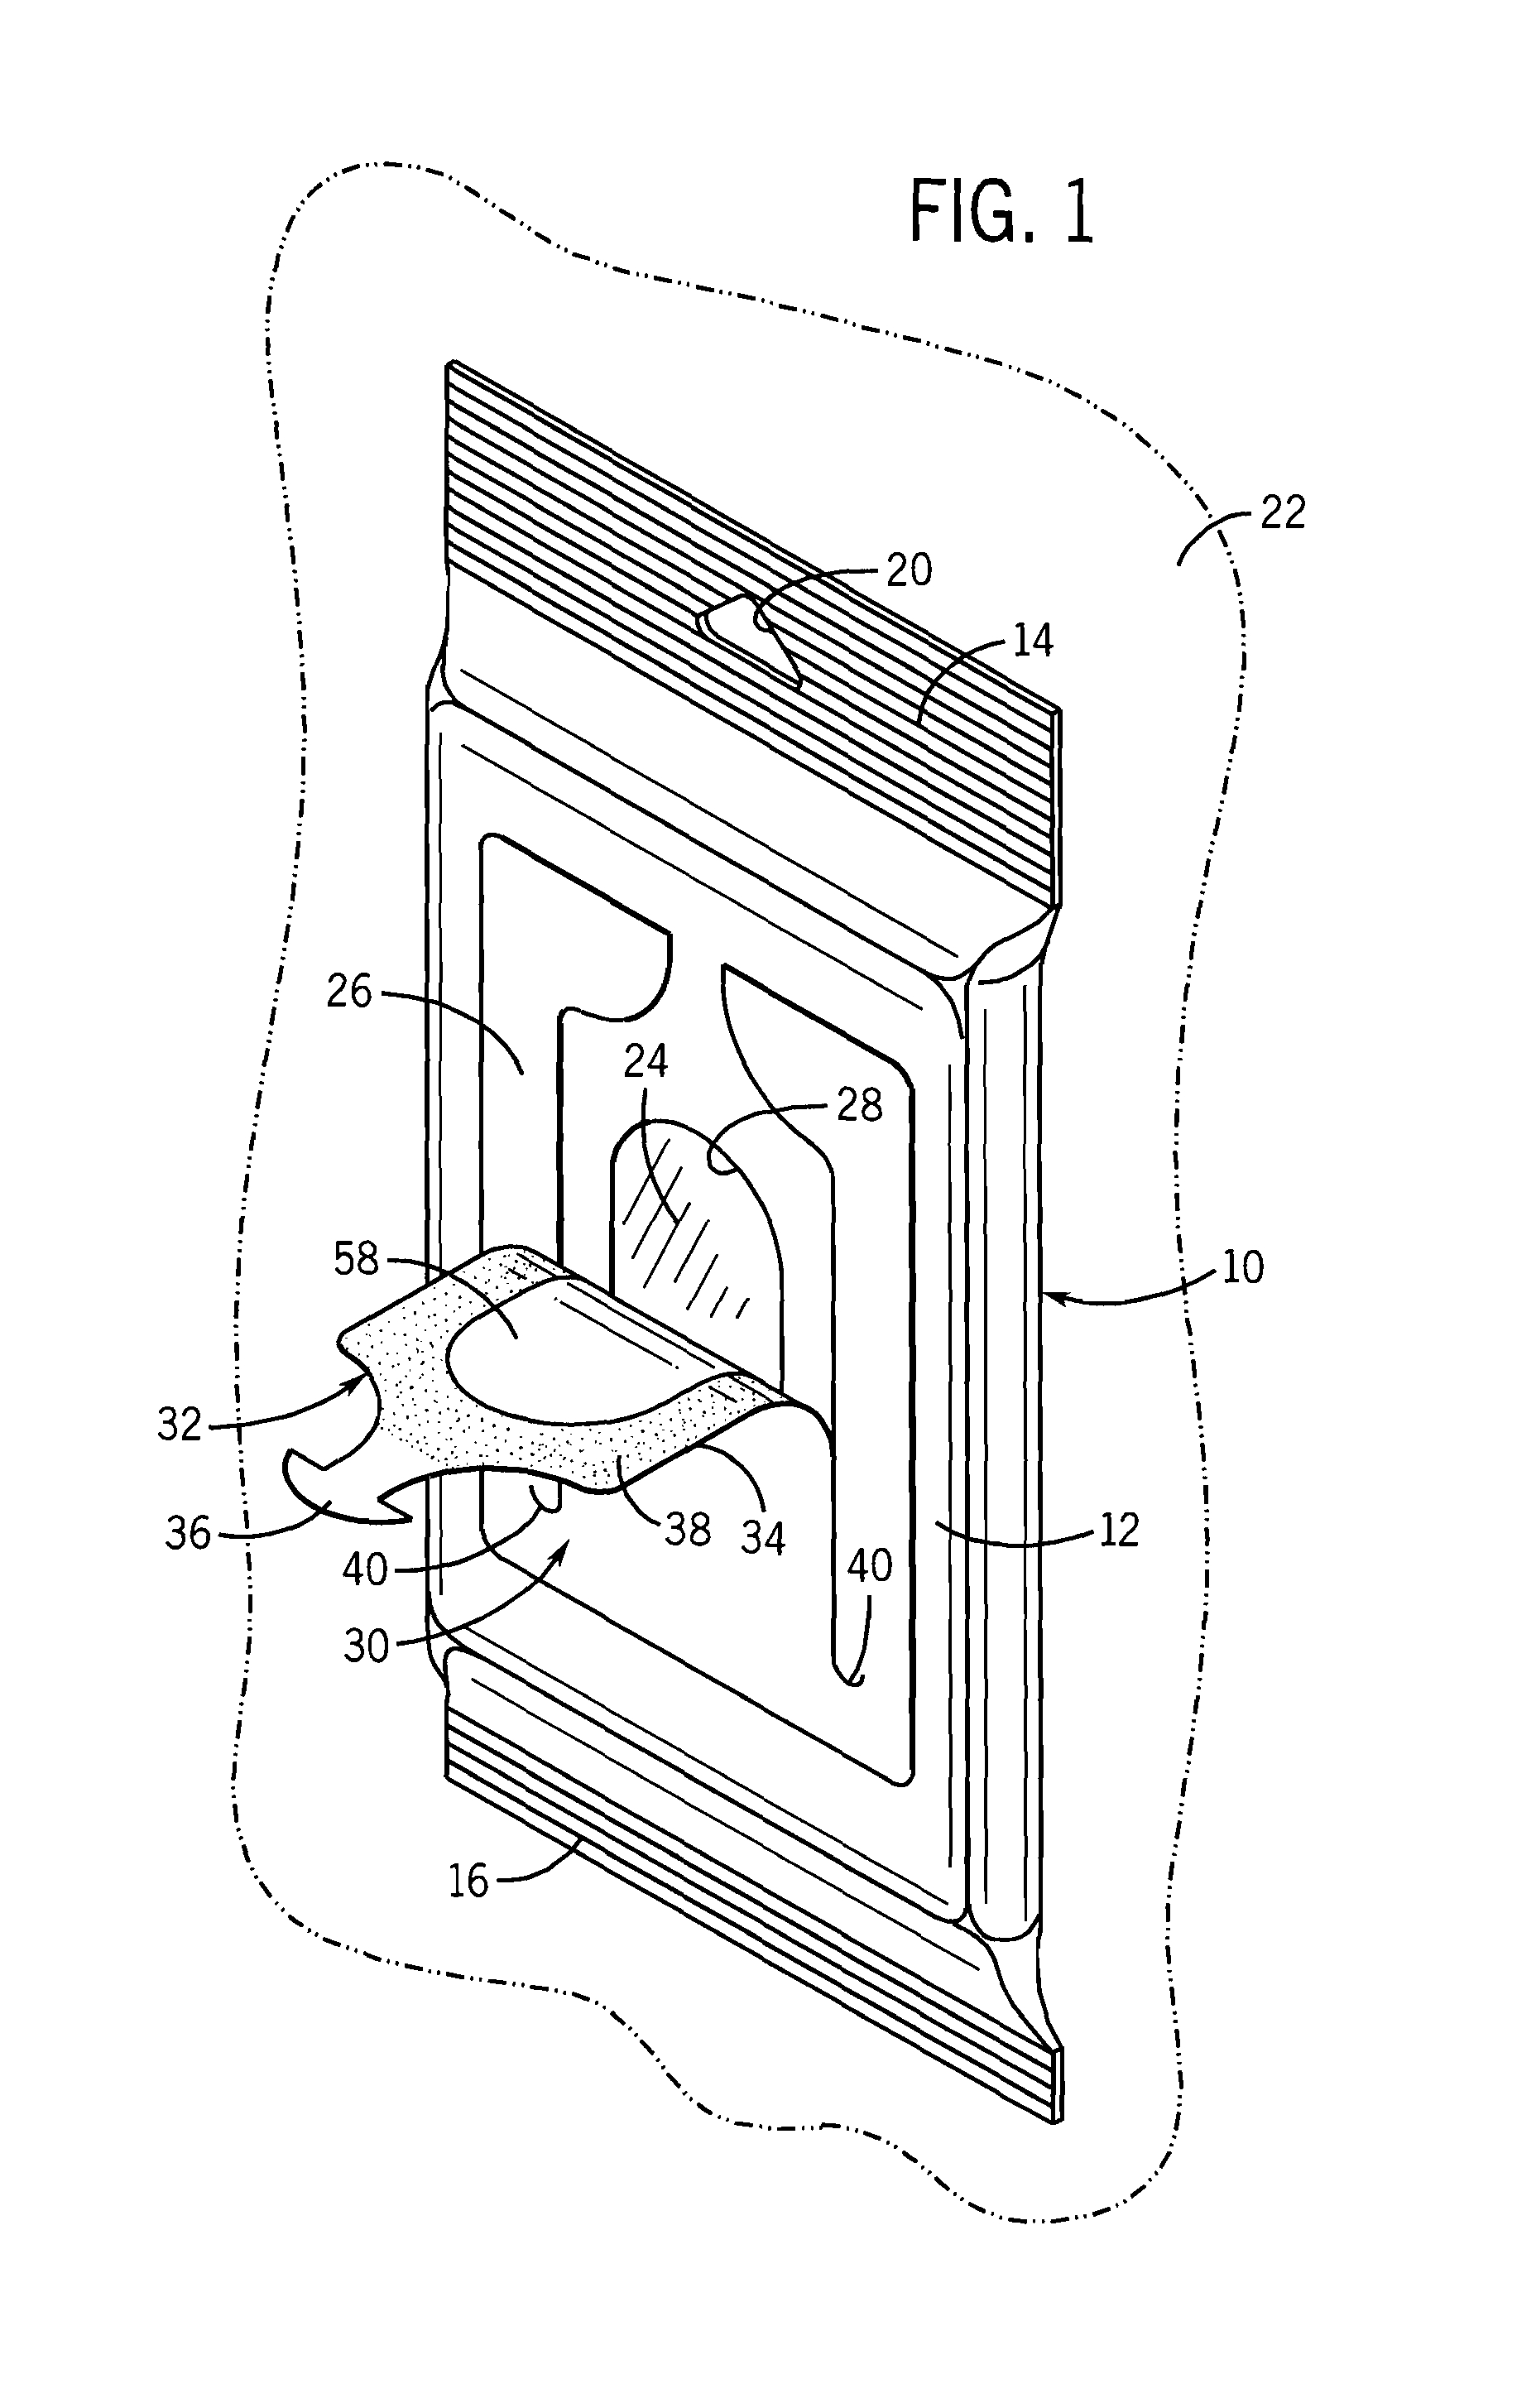 Stick-on, flexible, peel and seal package dispenser